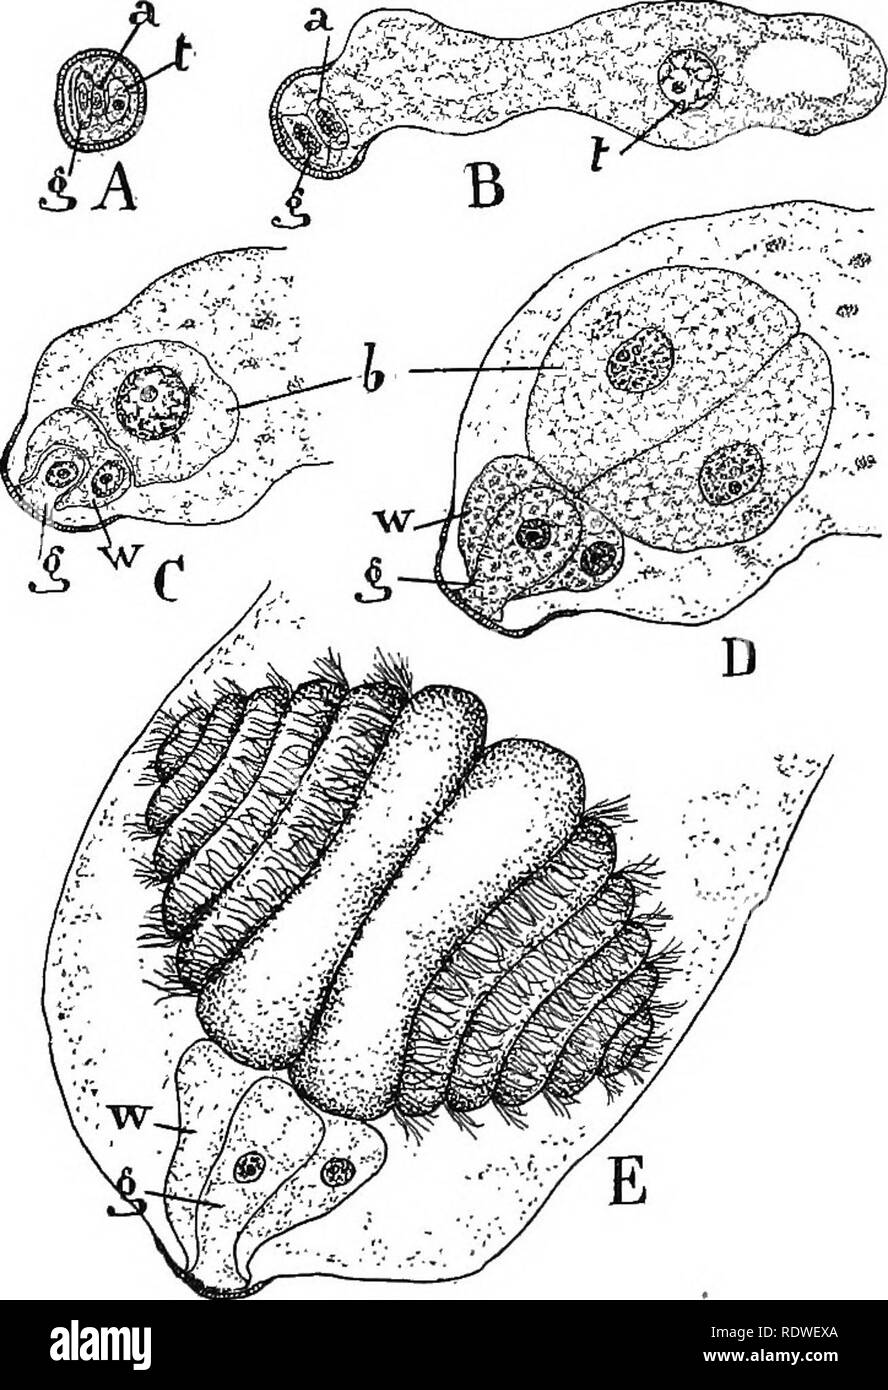 . Nature and development of plants. Botany. 358 MALE GAMETOPHYTE OF ZAMIA be compared with that of Selaginella (Fig. 247, A); the cell (g) representing the small cell, and the cell (a) corresponding to the large antheridial cell of the gametophyte of Selaginella (Fig. 243, i), while the cell (t) called the tube cell, represents a new depar- ture in the evolution of the male gametophyte. The tube cell. Fig. 247. Male gametophyte of Zamia: A, stage of germination of the microspore attained in the sporangium. See text for explanation of figures. B, formation of tube for absorbing of food from meg Stock Photo